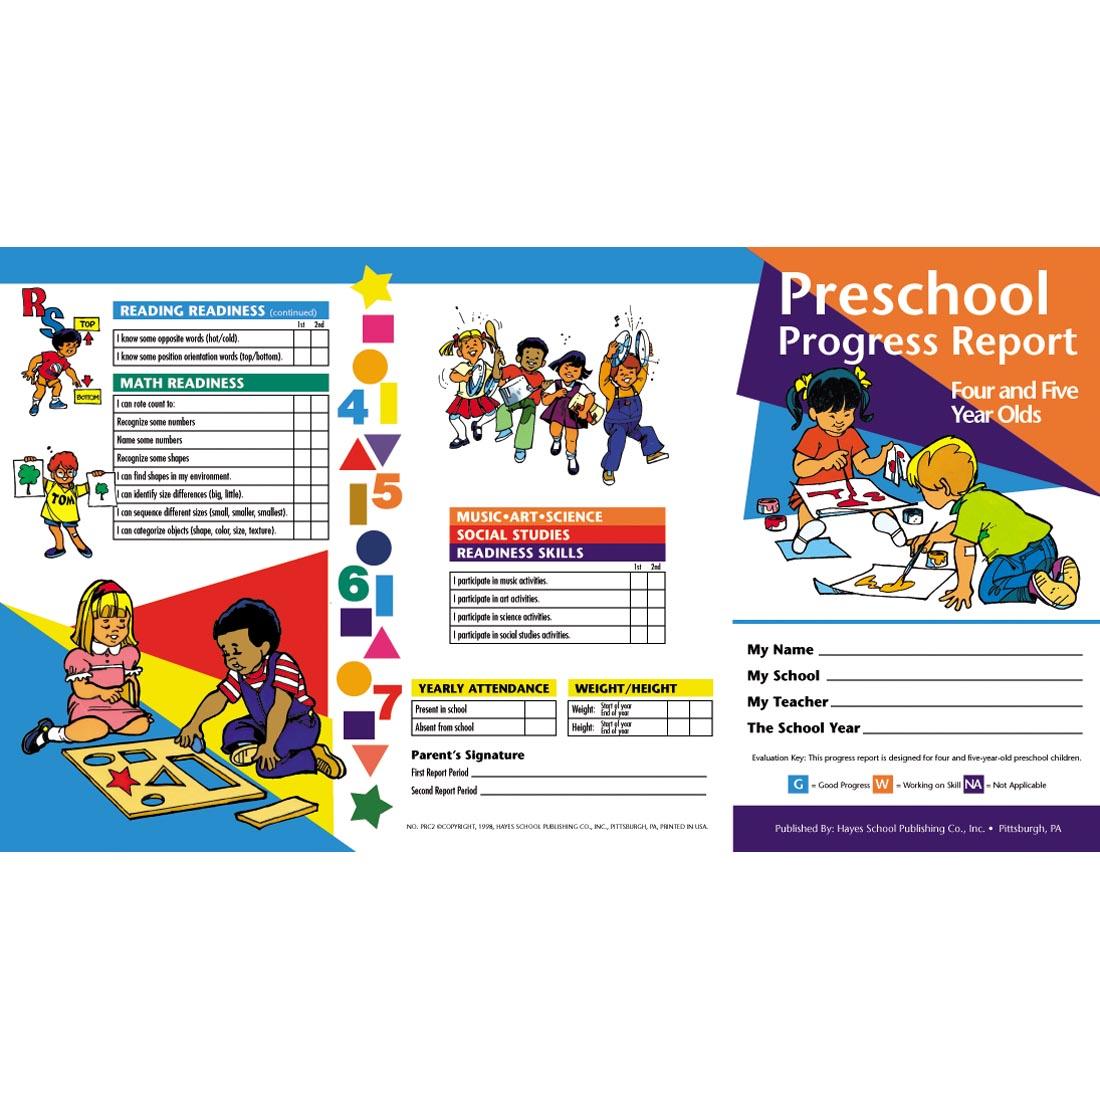 Preschool Progress Report: Four and Five Year Olds